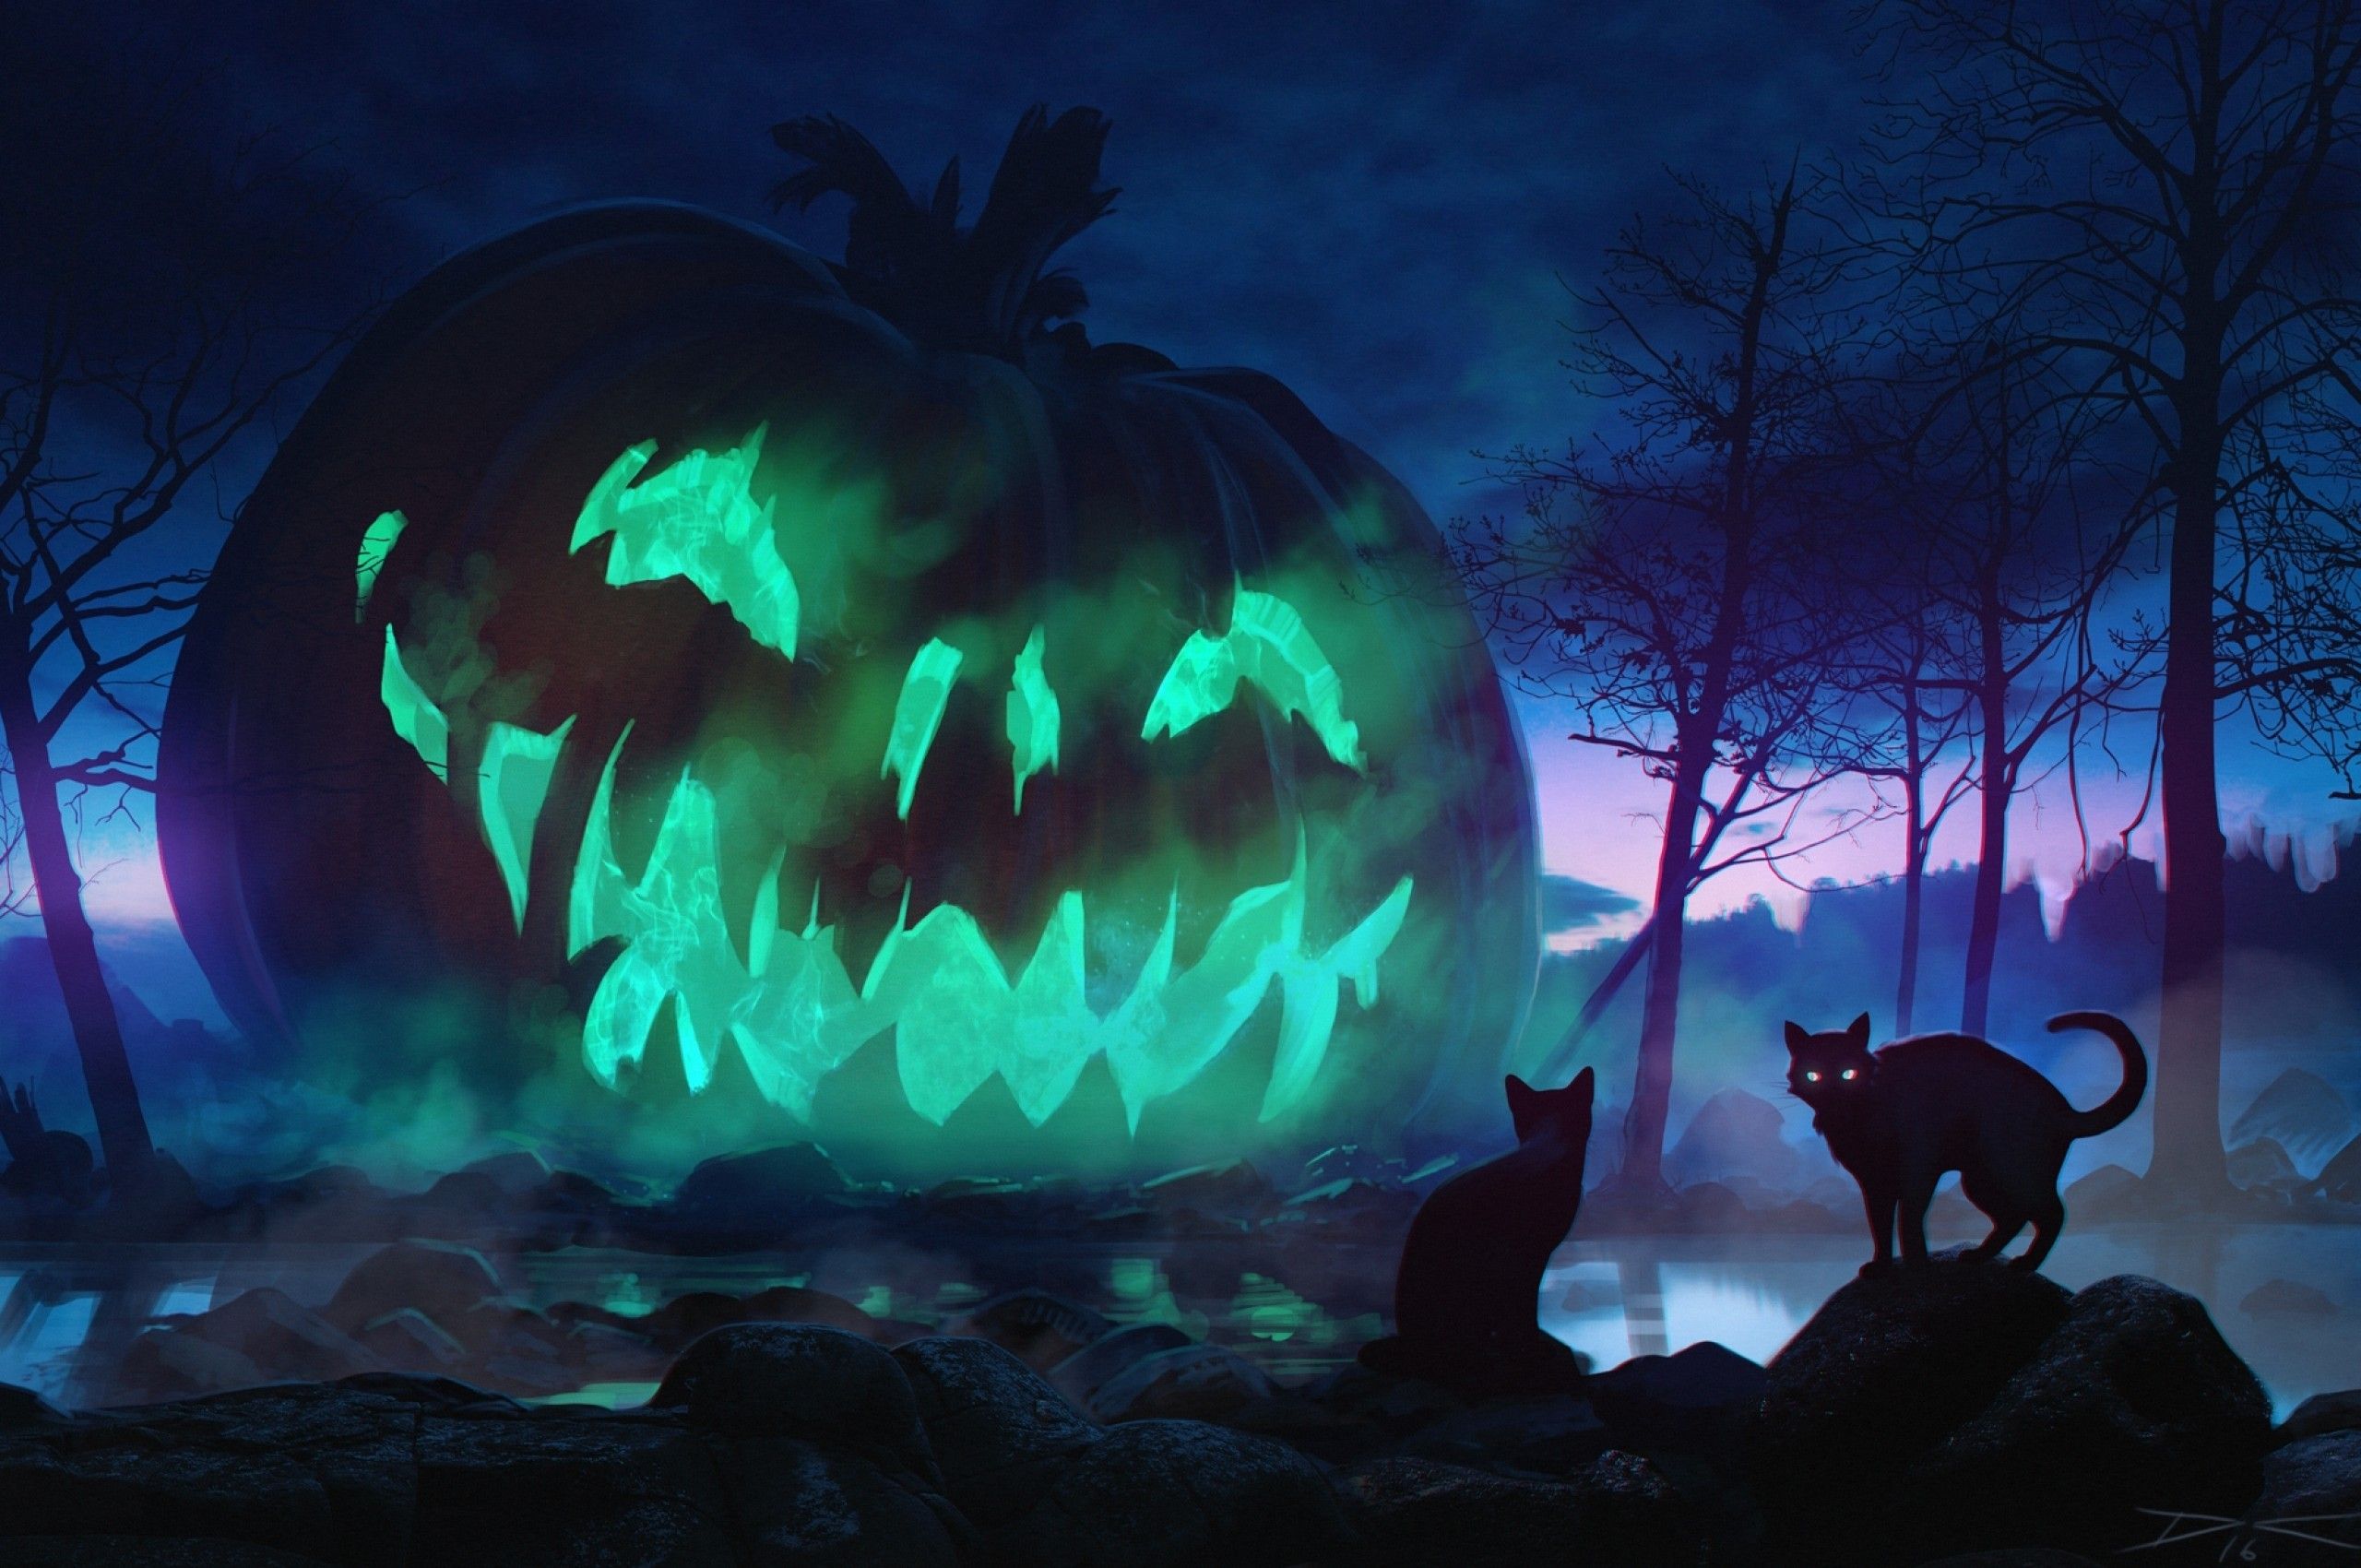 Download 2560x1700 Halloween, Giant Pumpkin, Scary, Cats, Dark Theme, Forest, Fog, Stones Wallpaper for Chromebook Pixel